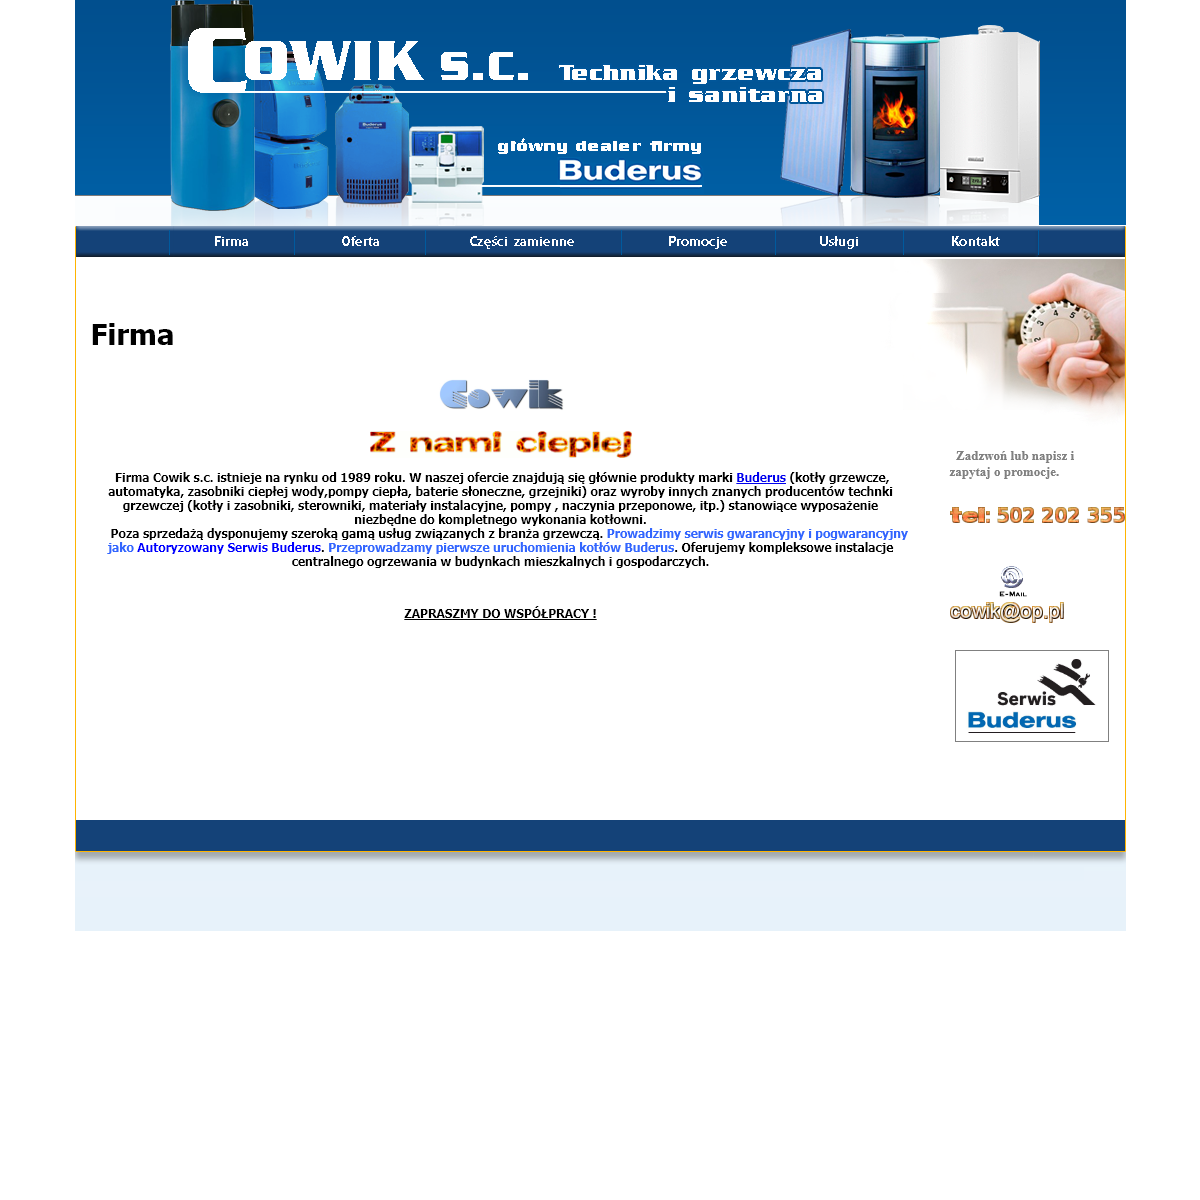 A complete backup of cowik.pl